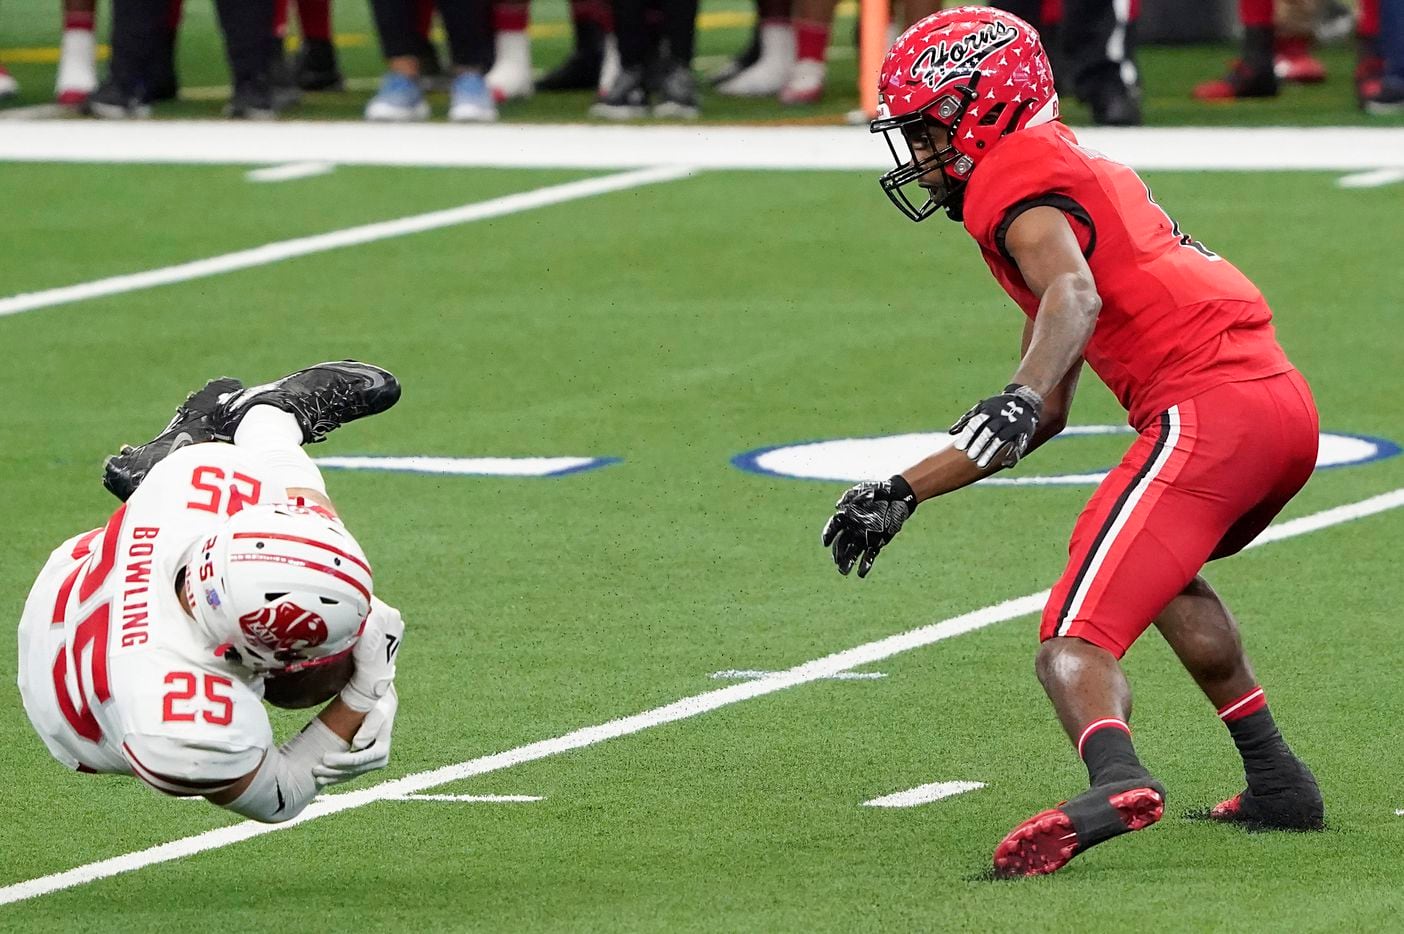 Katy linebacker Shepherd Bowling (25) intercepts a pass intended for Cedar Hill wide receiver Anthony Thomas IV (1) during the first half of the Class 6A Division II state football championship game at AT&T Stadium on Saturday, Jan. 16, 2021, in Arlington, Texas.